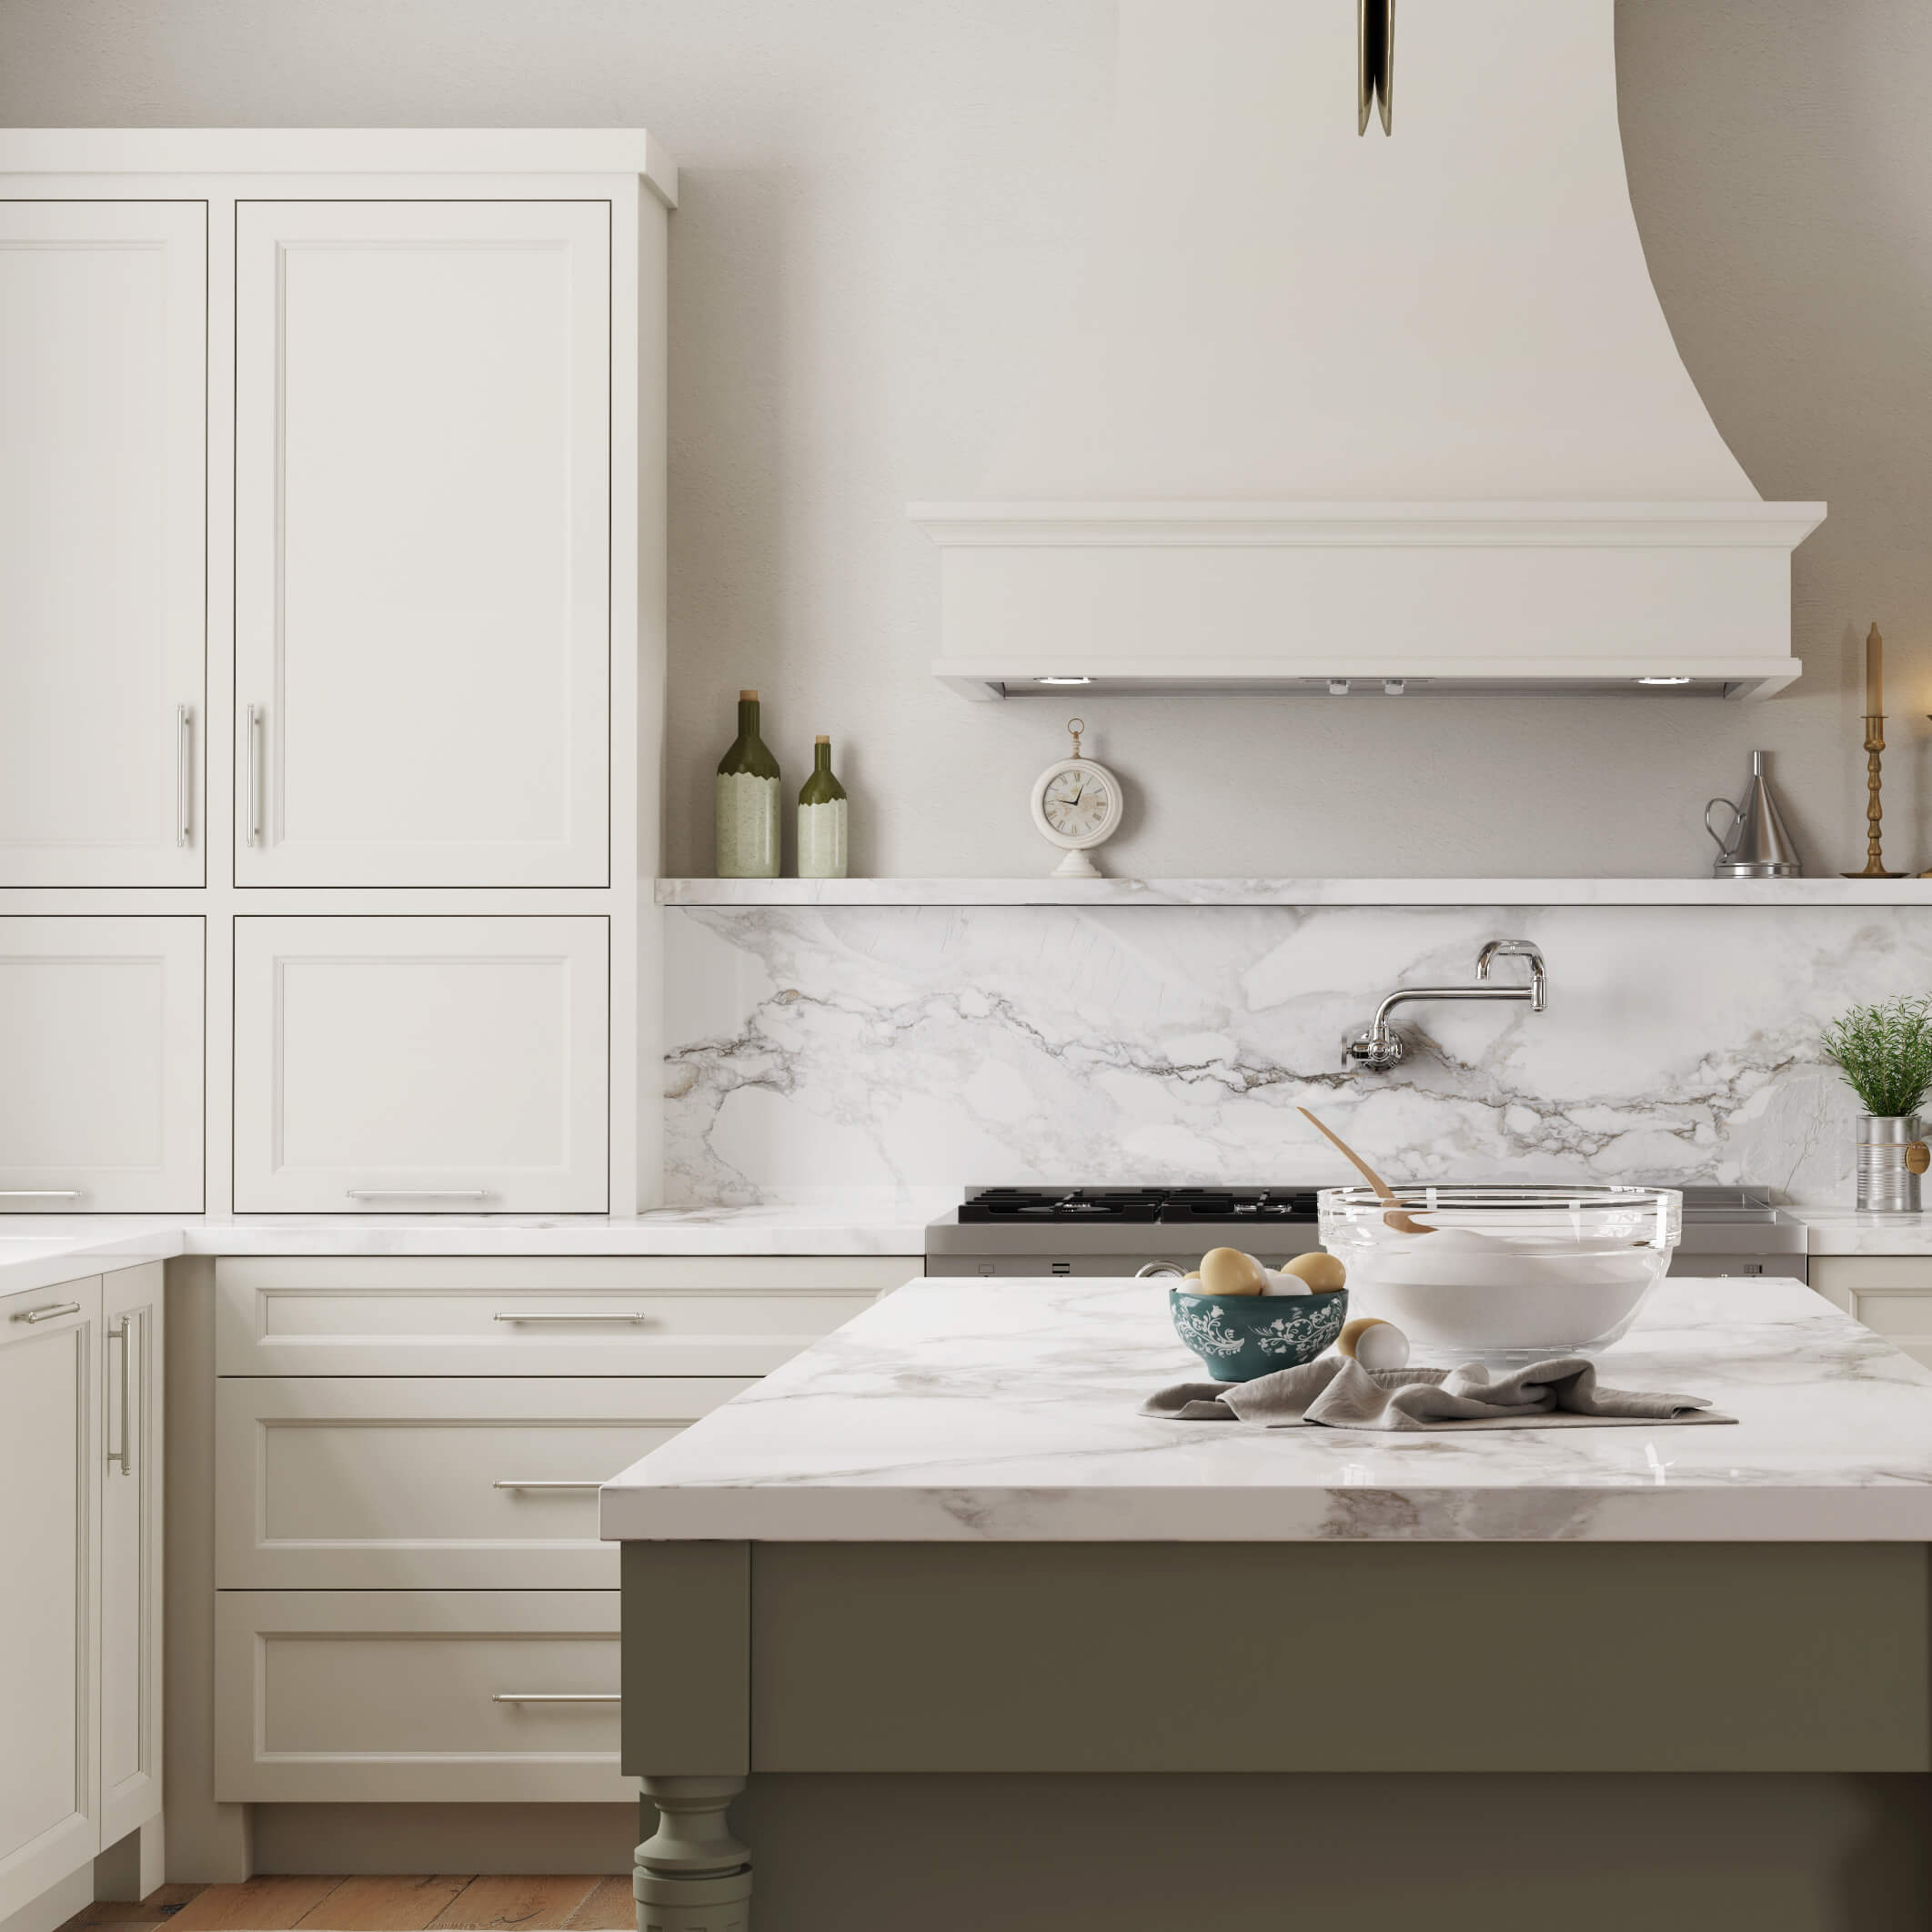 A beautiful kitchen with off-white muted white cabinets with the new trendy door style.